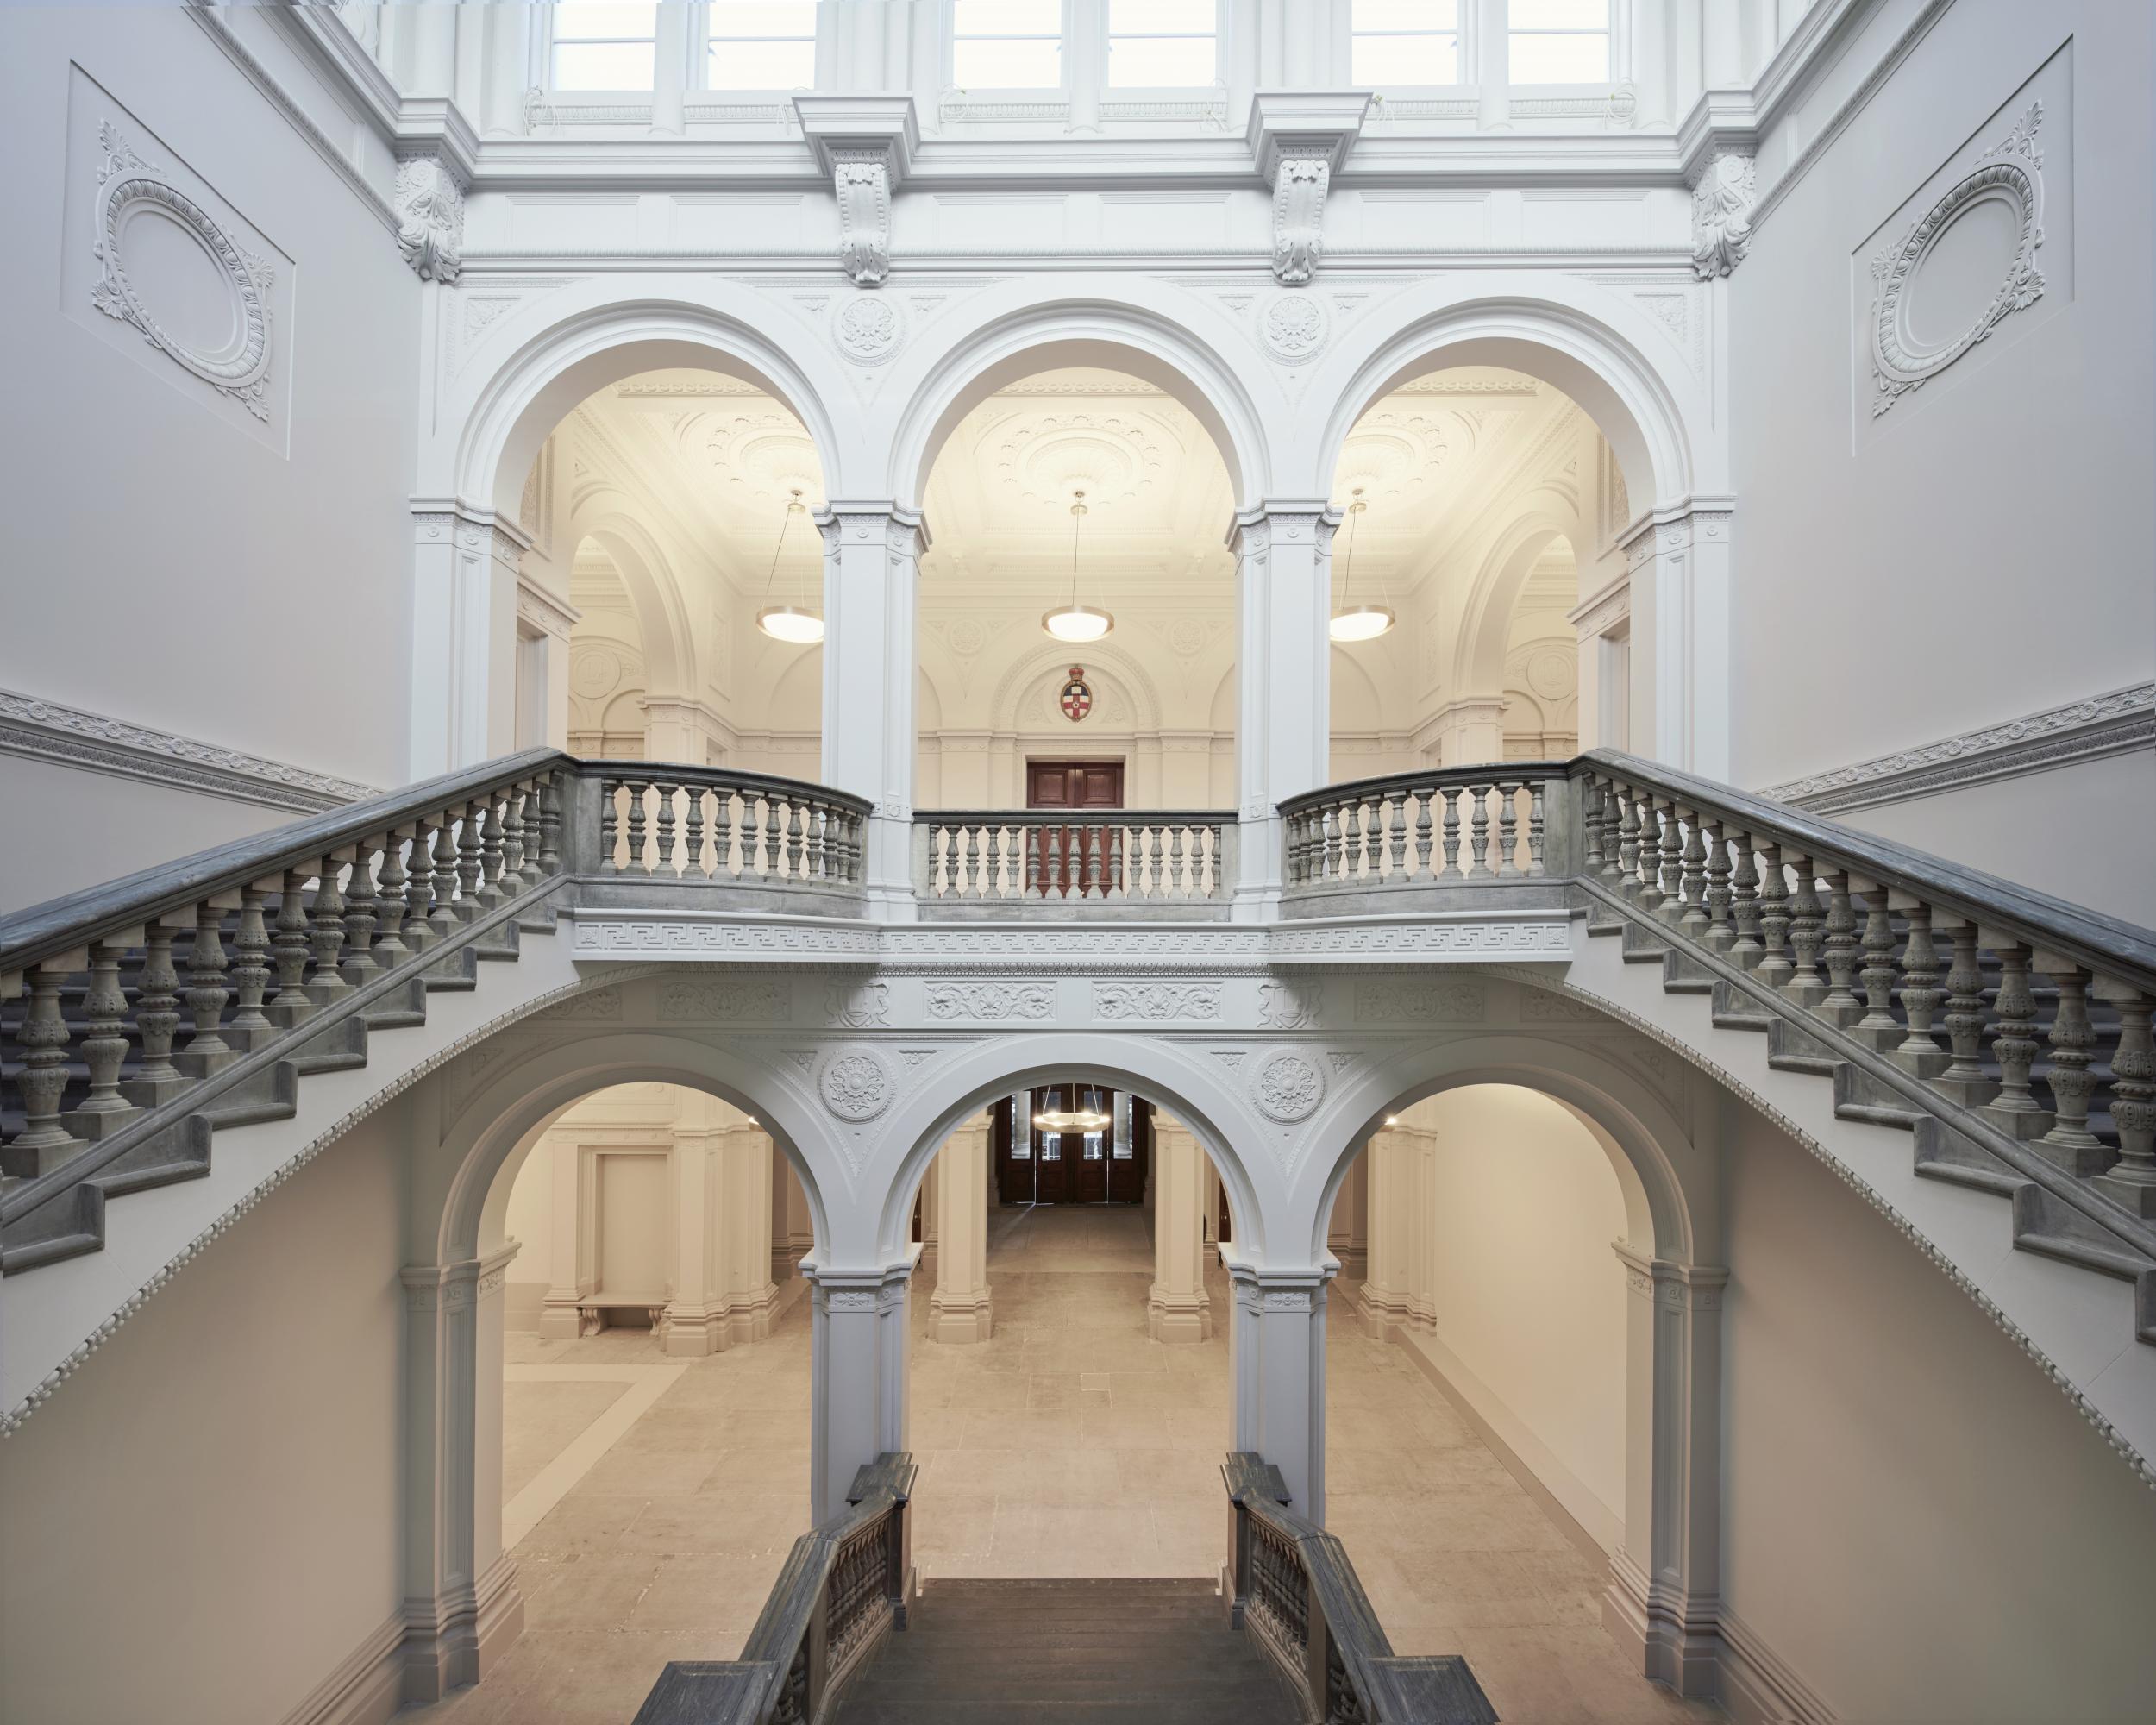 The Wohl Entrance Hall